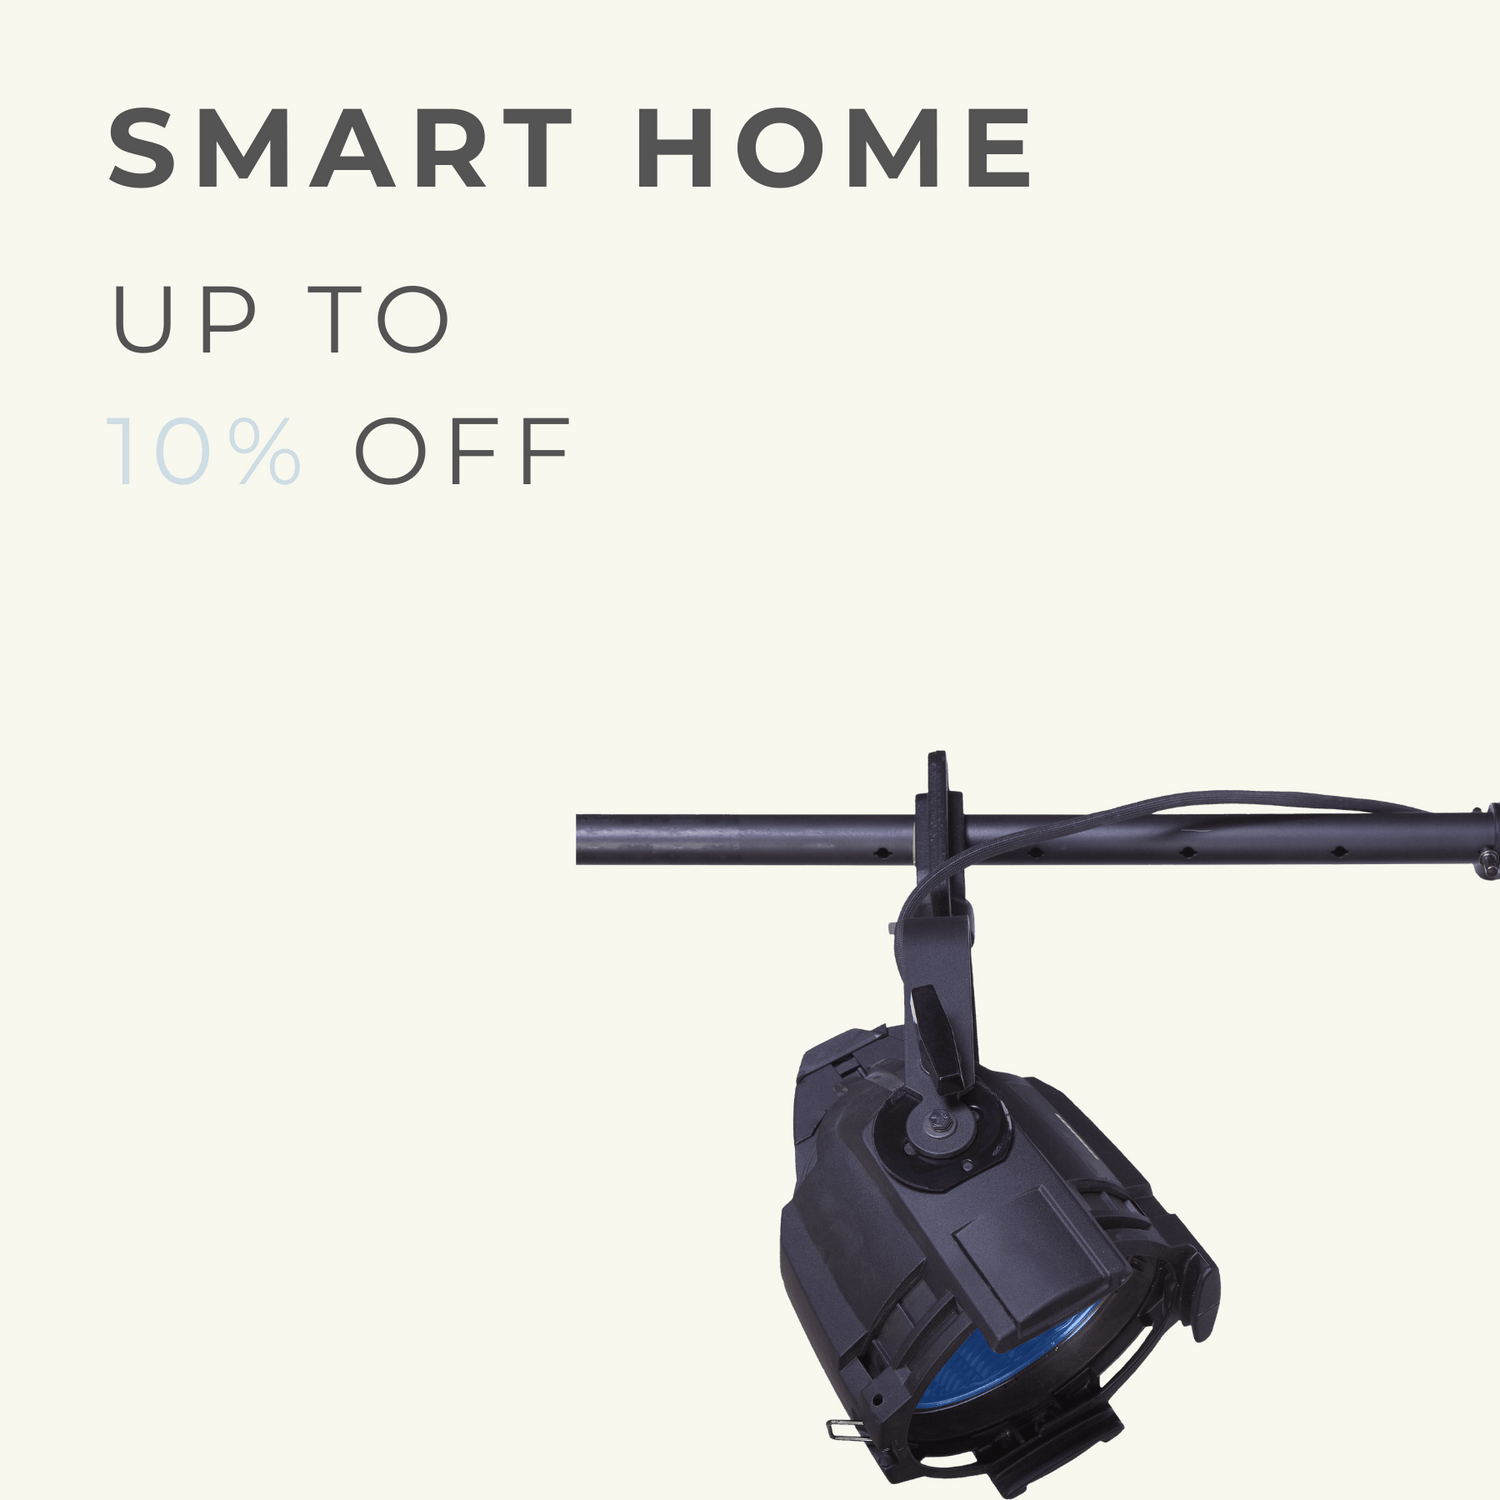 A black spotlight displayed against a white background with the promotional offer 'SMART HOME UP TO 10% OFF' indicating a sale on smart home devices.